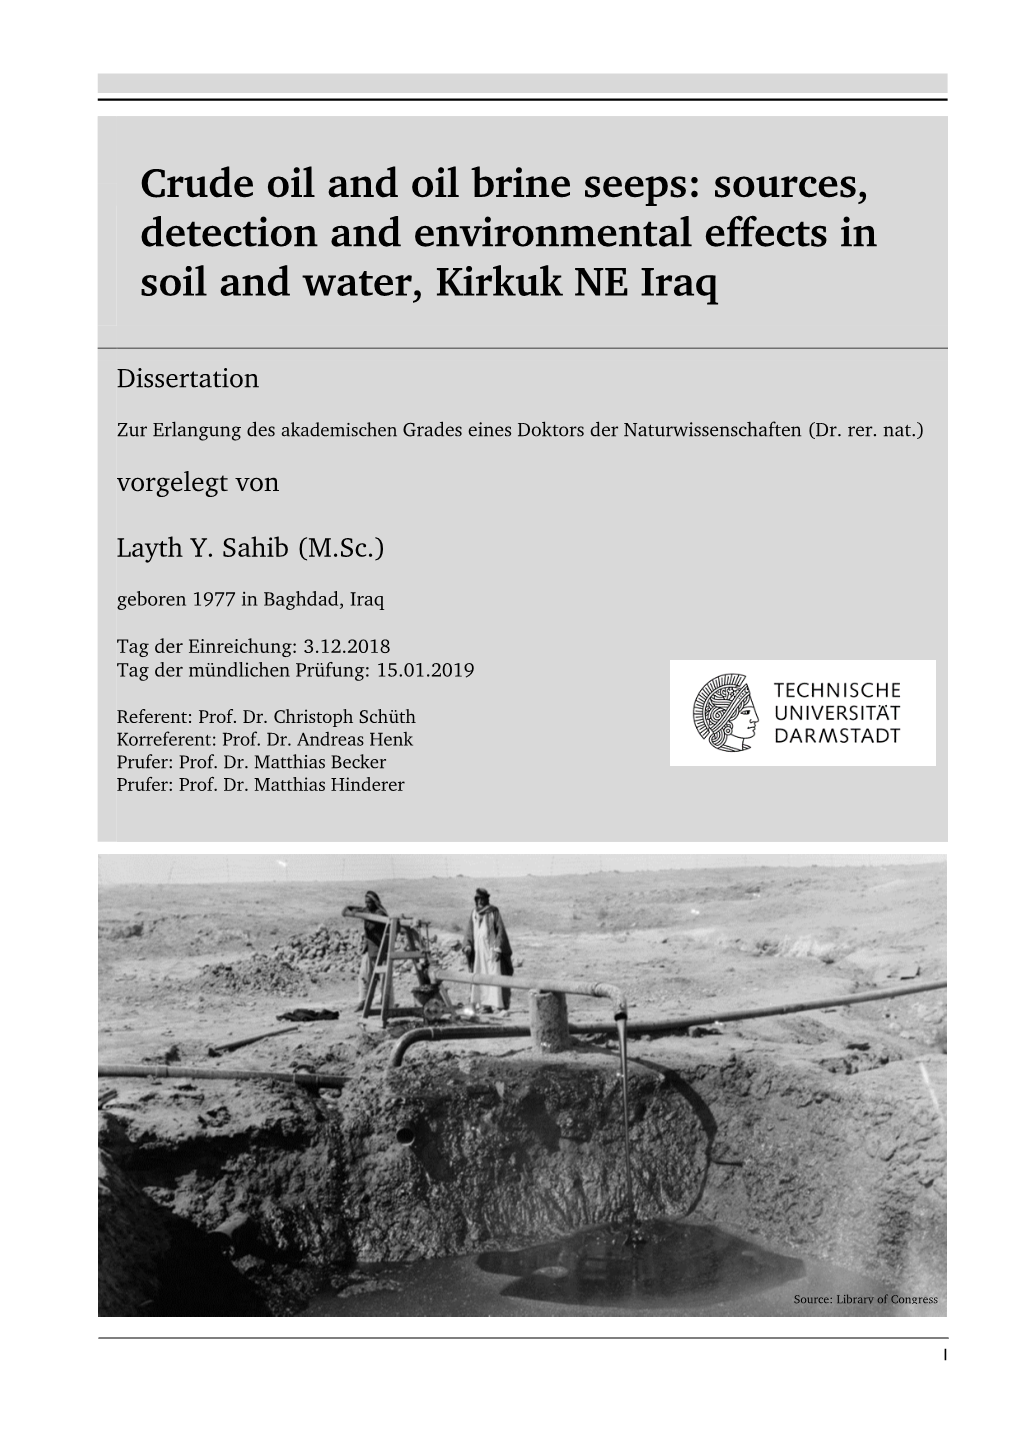 Crude Oil and Oil Brine Seeps: Sources, Detection and Environmental Effects in Soil and Water, Kirkuk NE Iraq